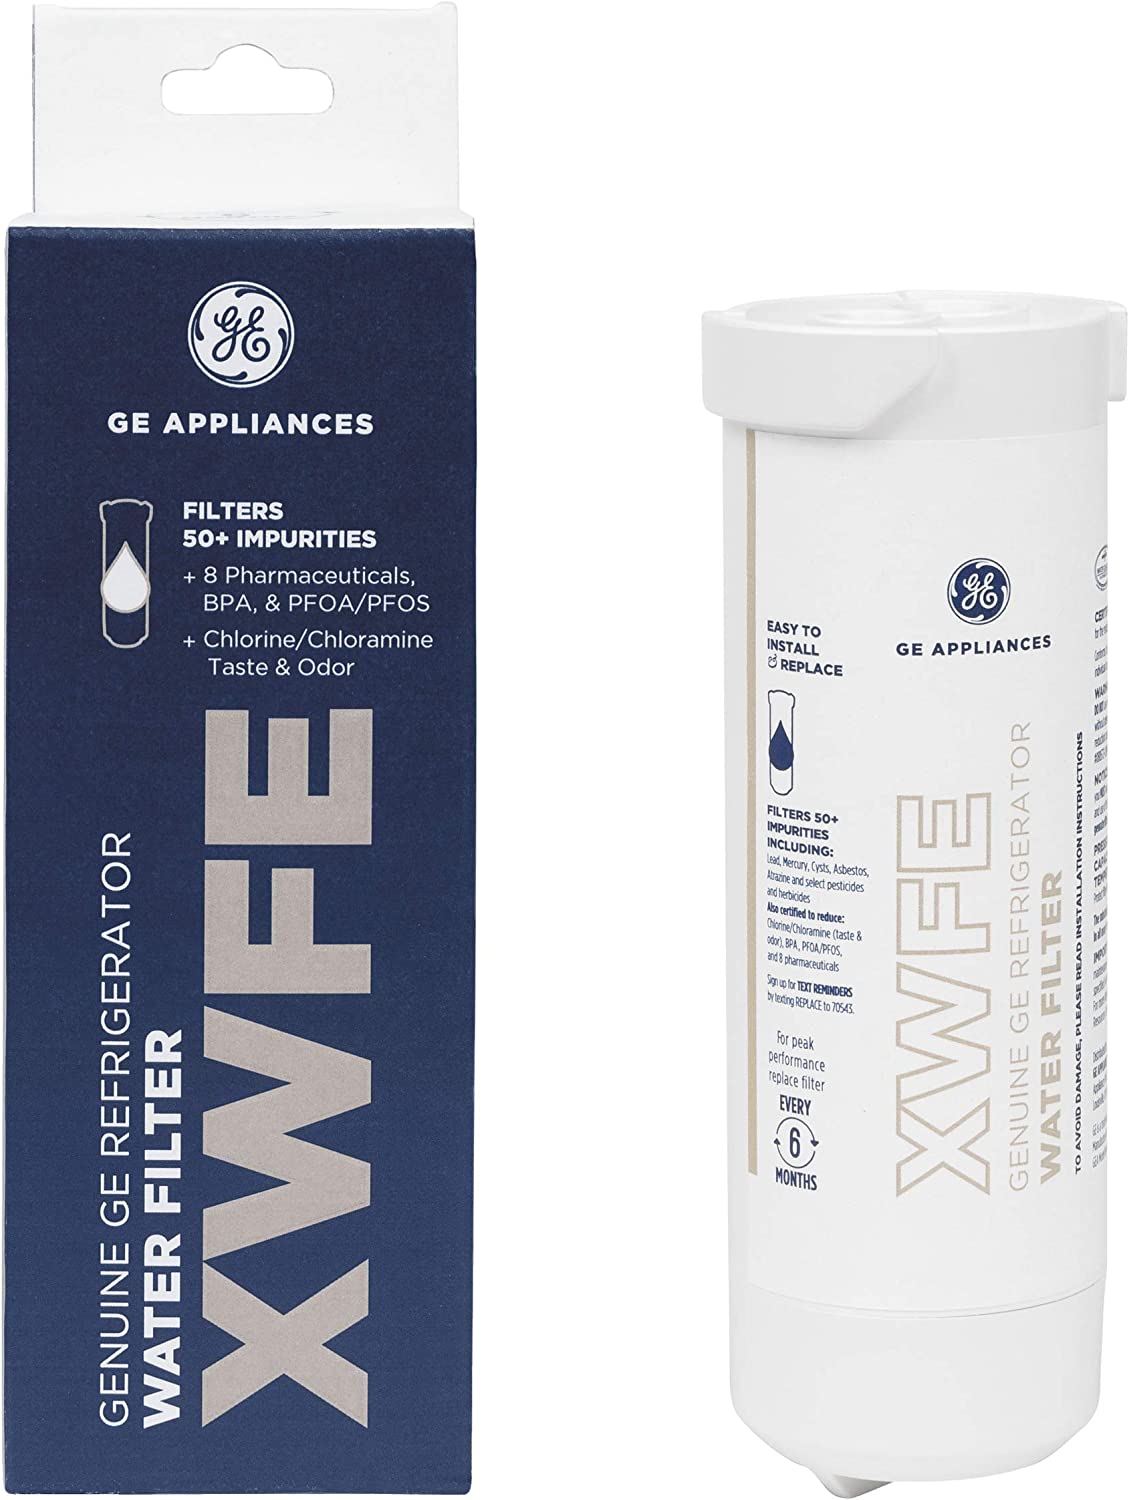 GE XWFE Refrigerator Water Filter | Certified to [...]